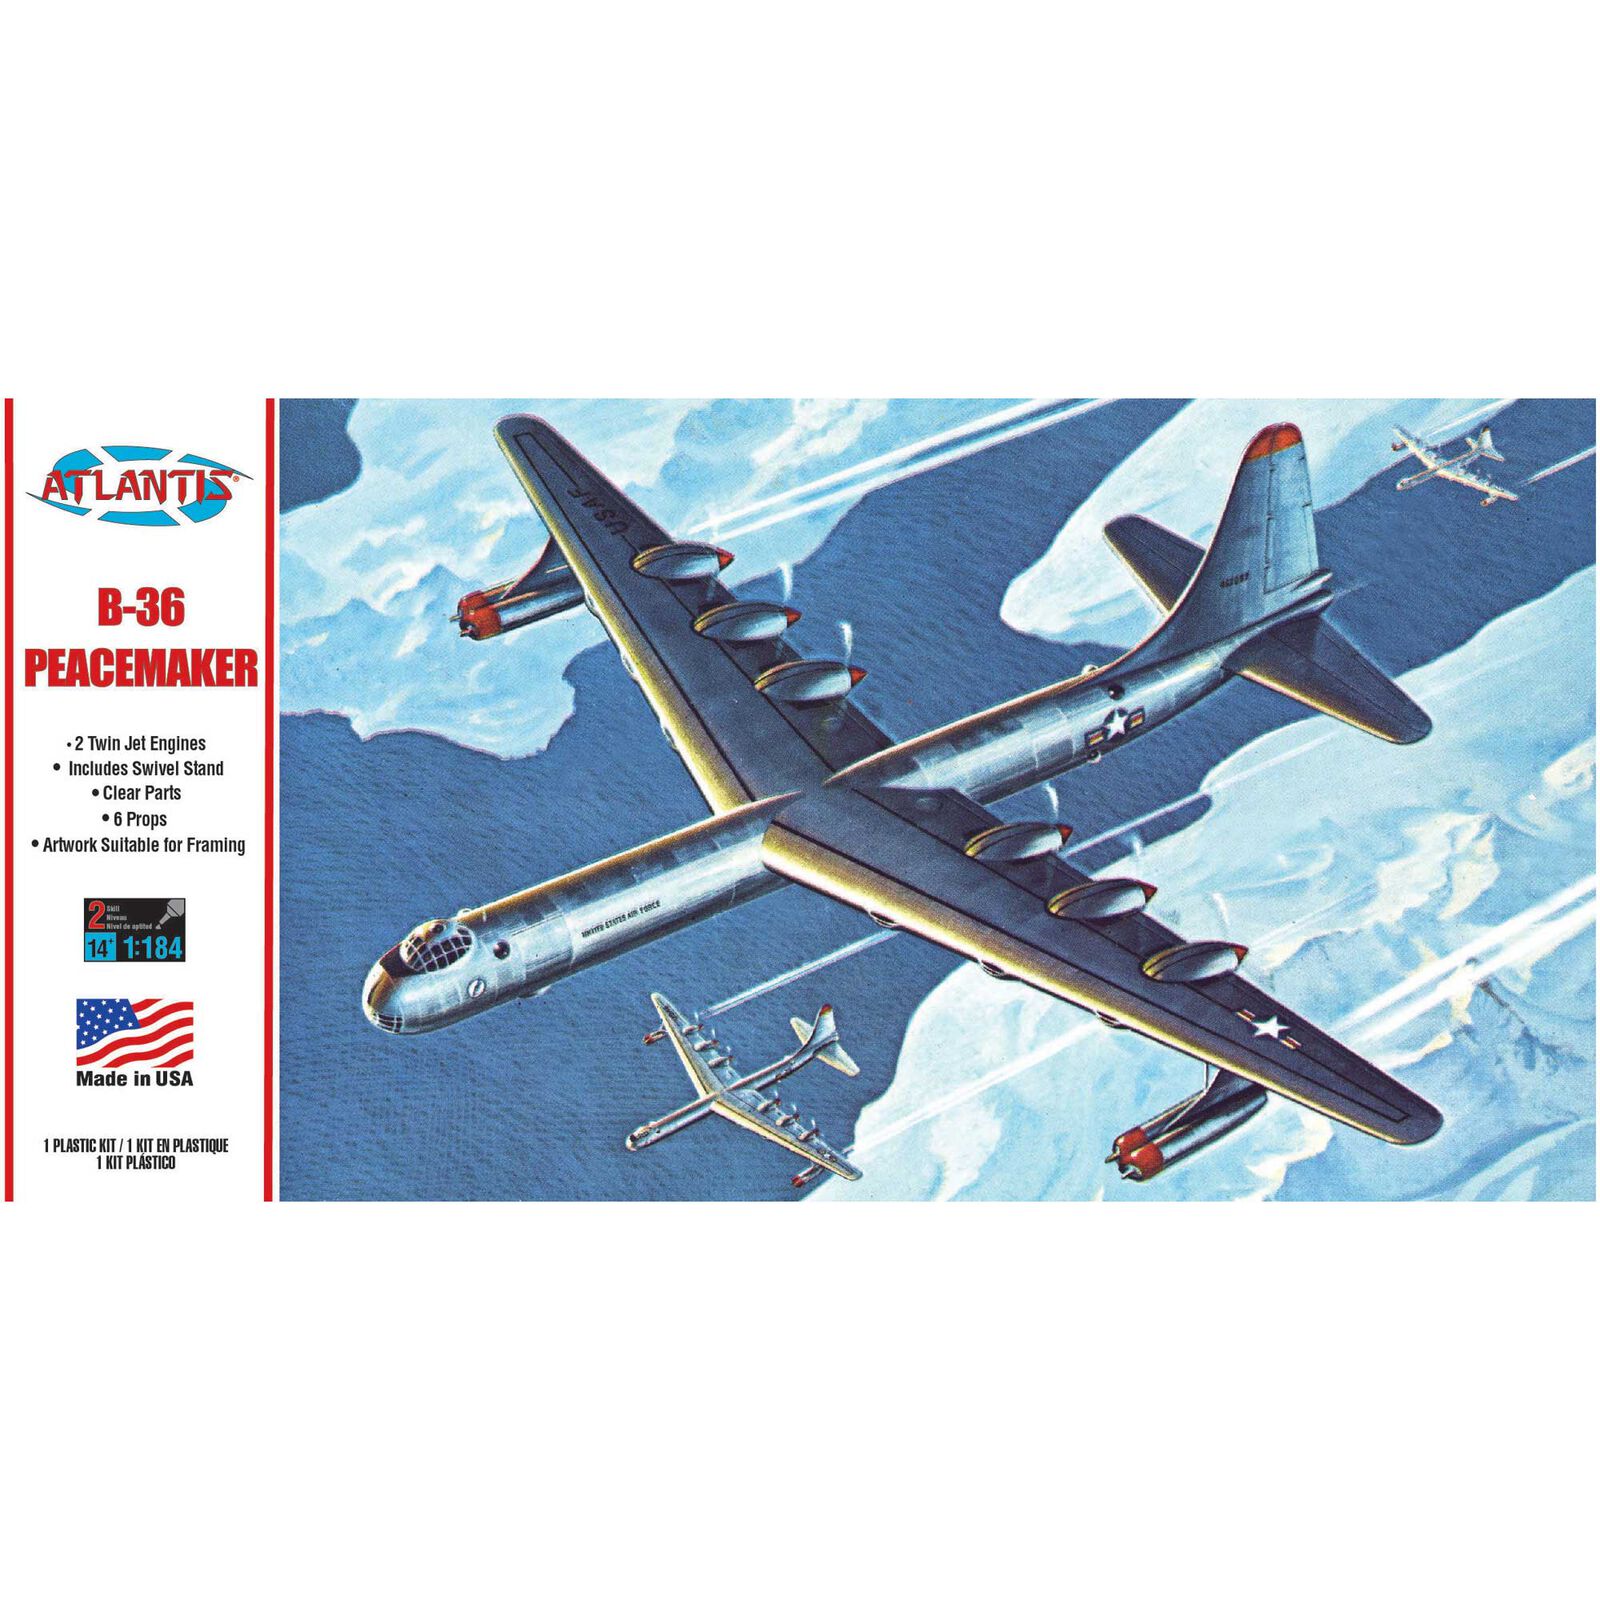 B-36 Peacemaker with Swivel Stand, 1/184